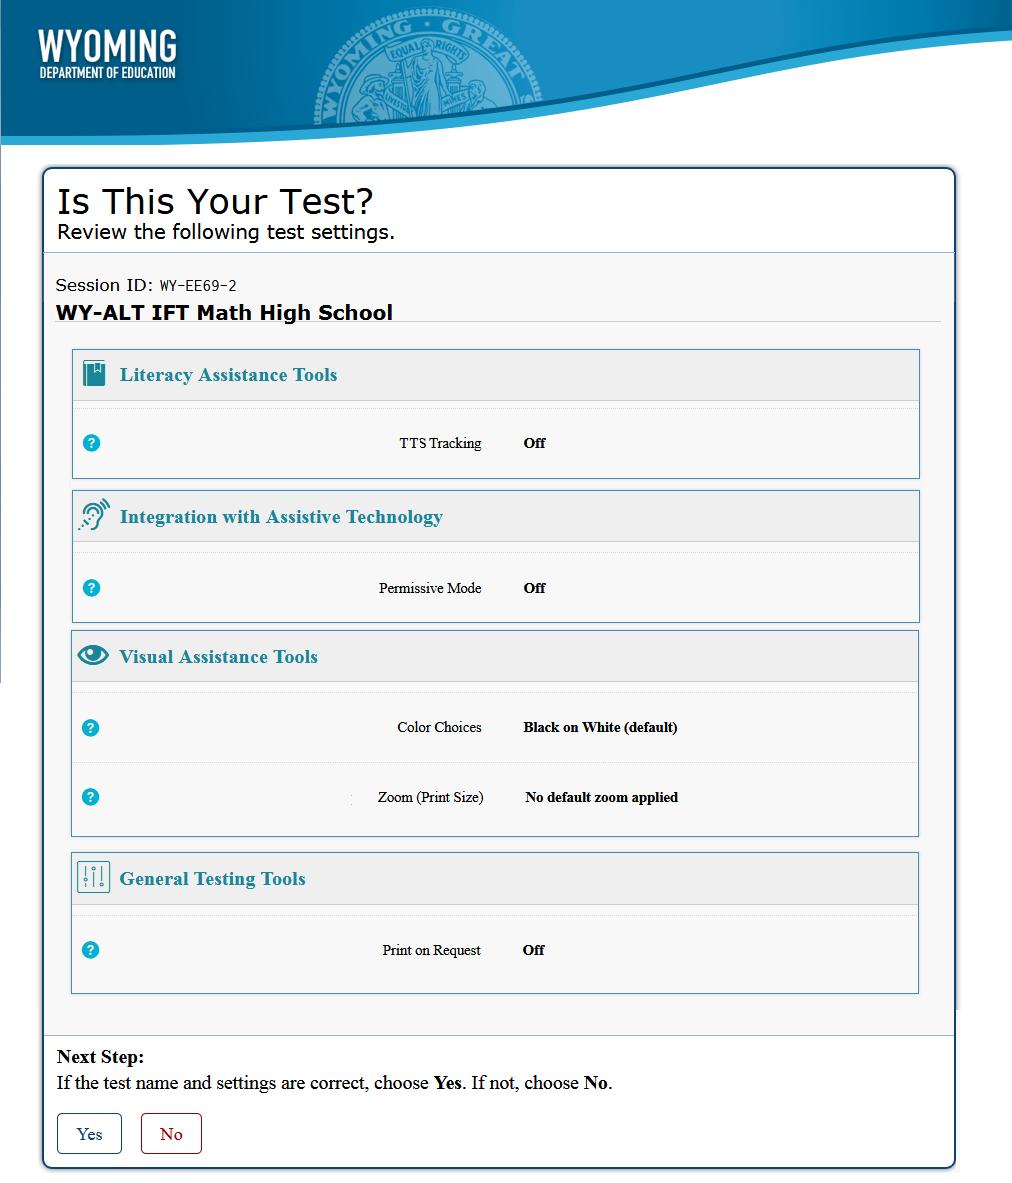 Signing in to the Testing Site Step 4: Verifying Test Information After you approve the student for testing, the TA and student should verify the test information and settings on the Is This Your